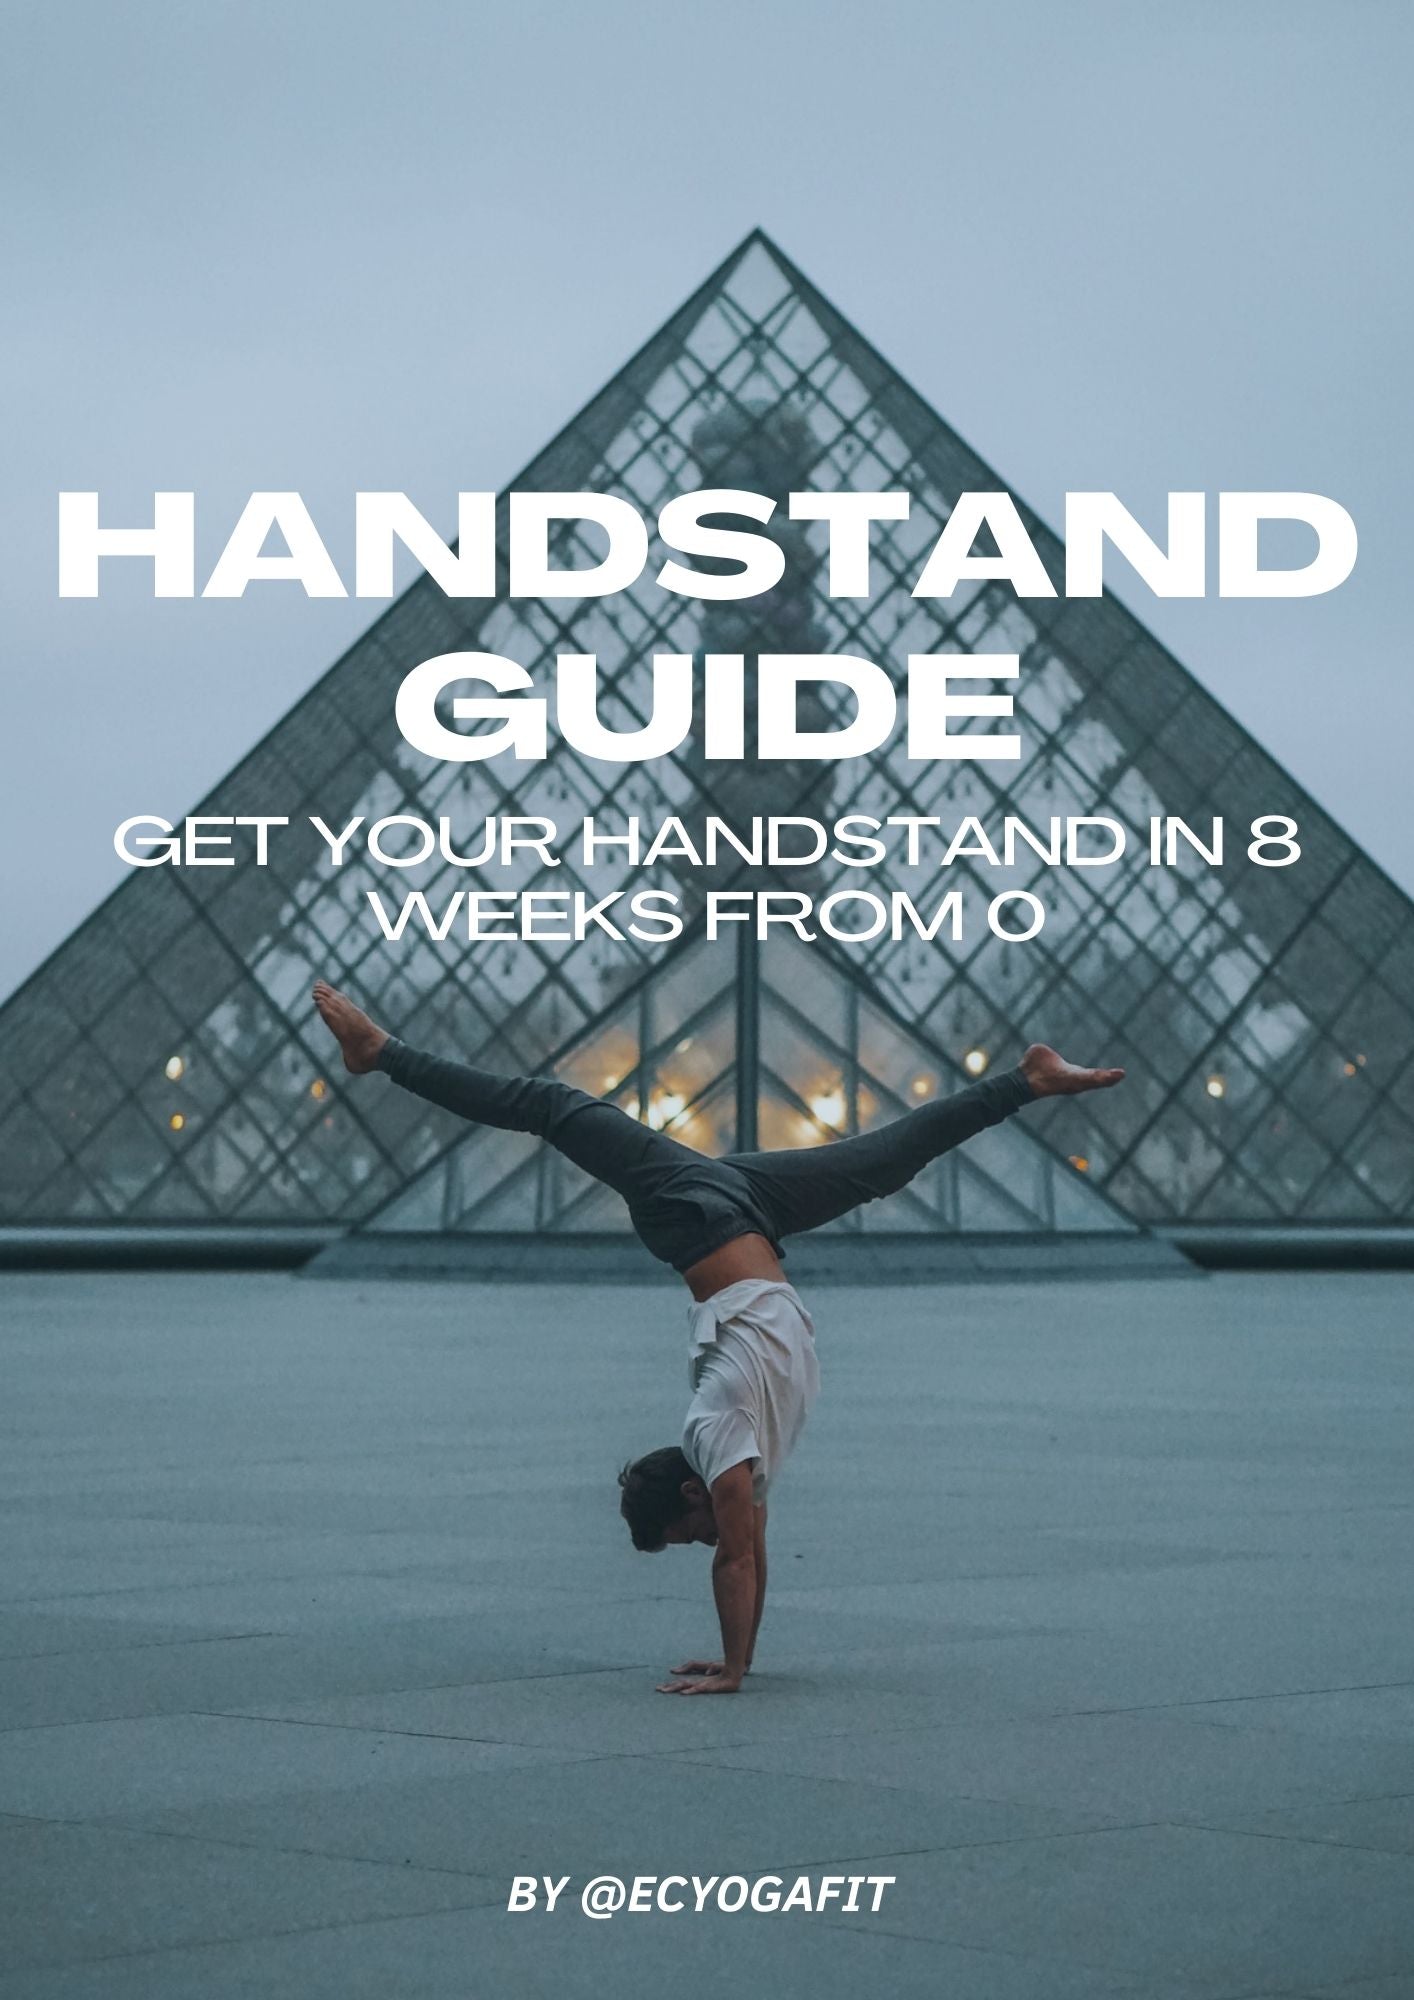 HANDSTAND PLAN 8 WEEKS *ENGLISH VERSION* - LEARN HOW TO GET YOUR HANDSTAND FROM 0